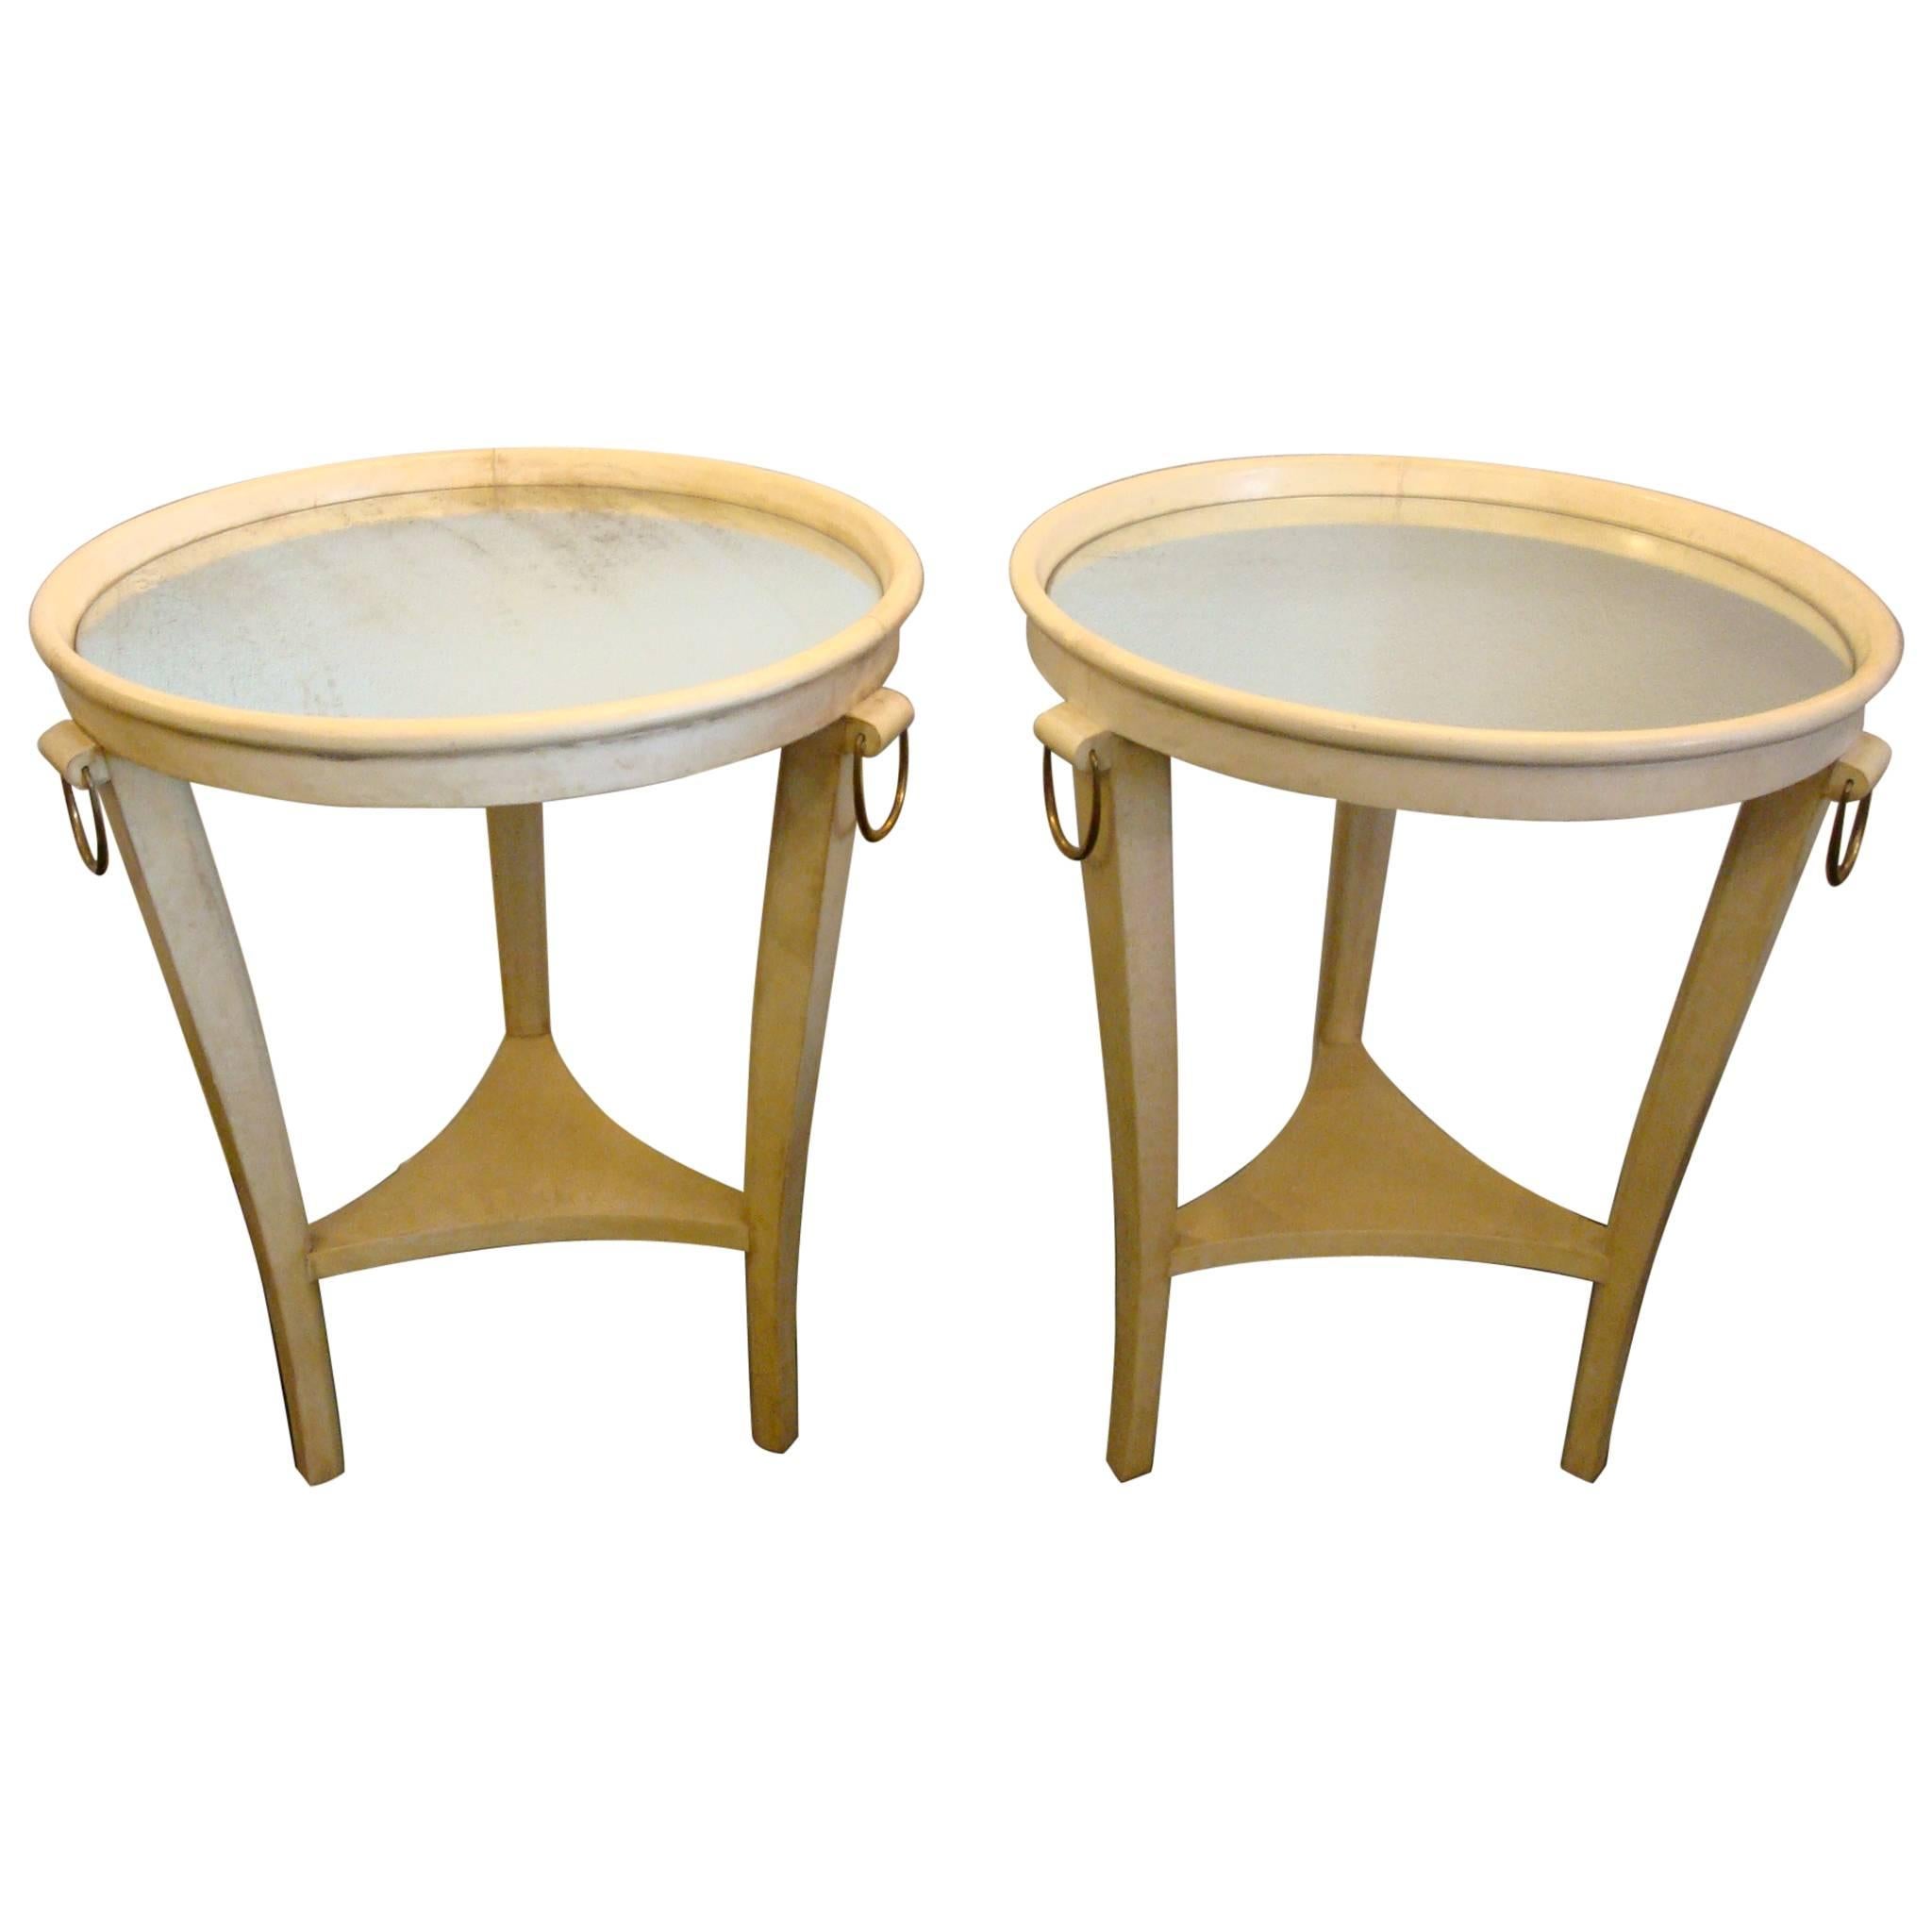 Art Deco Andre Arbus Parchment Leather and Mirror Side Tables, France, 1930s